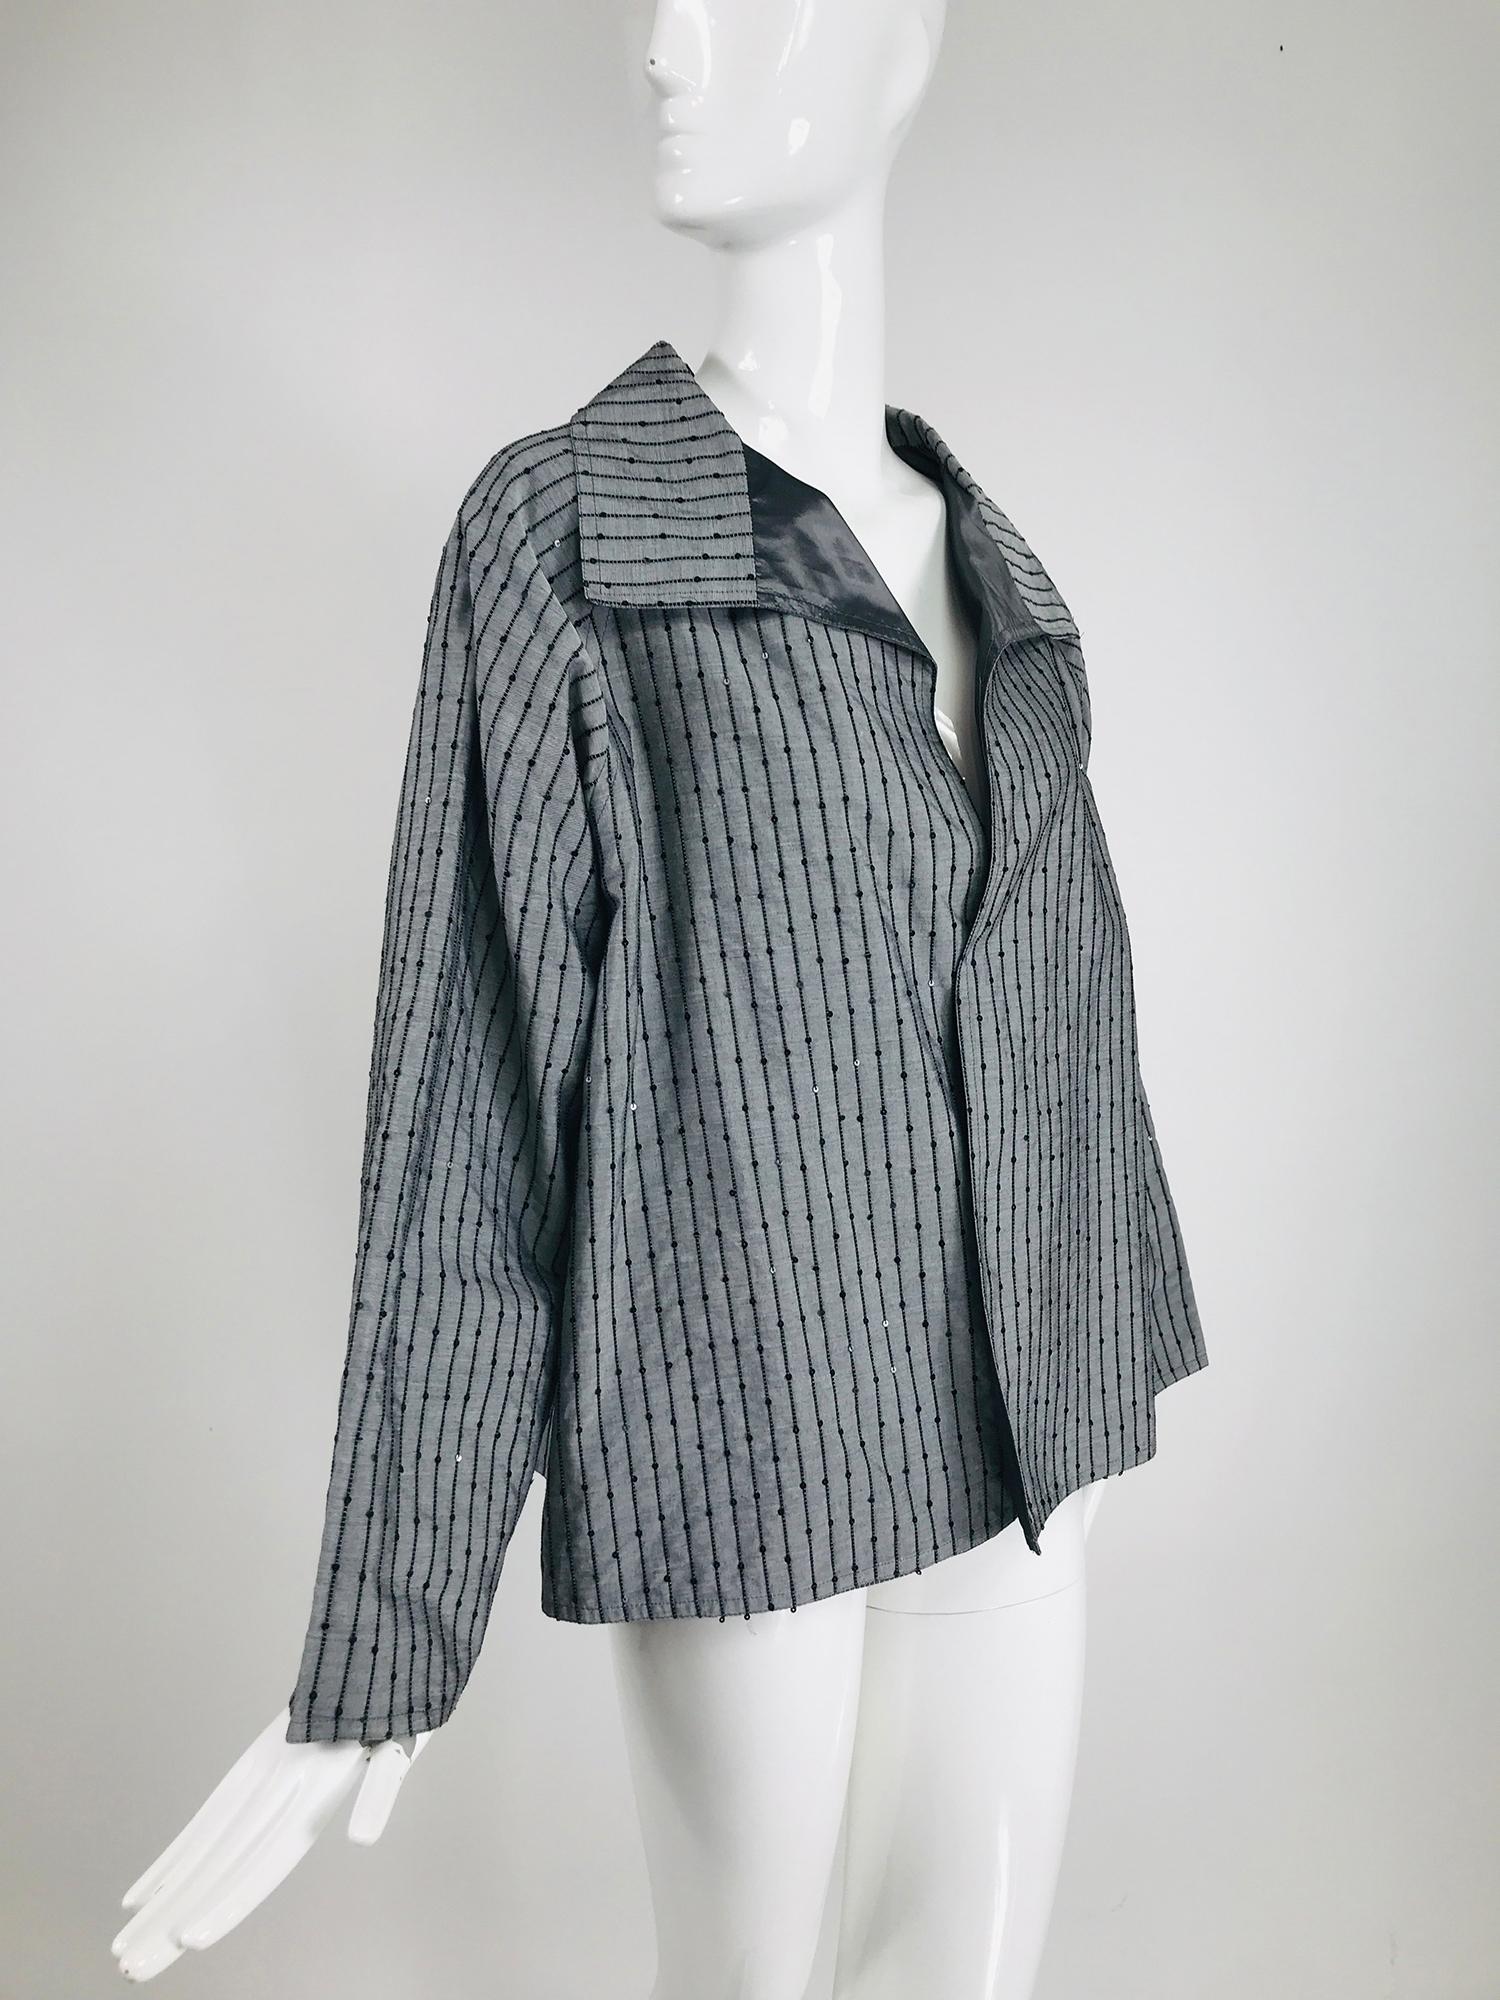 Zoran charcoal grey raised cord stripe with sequins swing jacket. Interesting fabric in charcoal silk with vertical appliqued raised cord which is interspersed with tiny sequins. Wing collar jacket has full raglan sleeves, the jacket is open at the